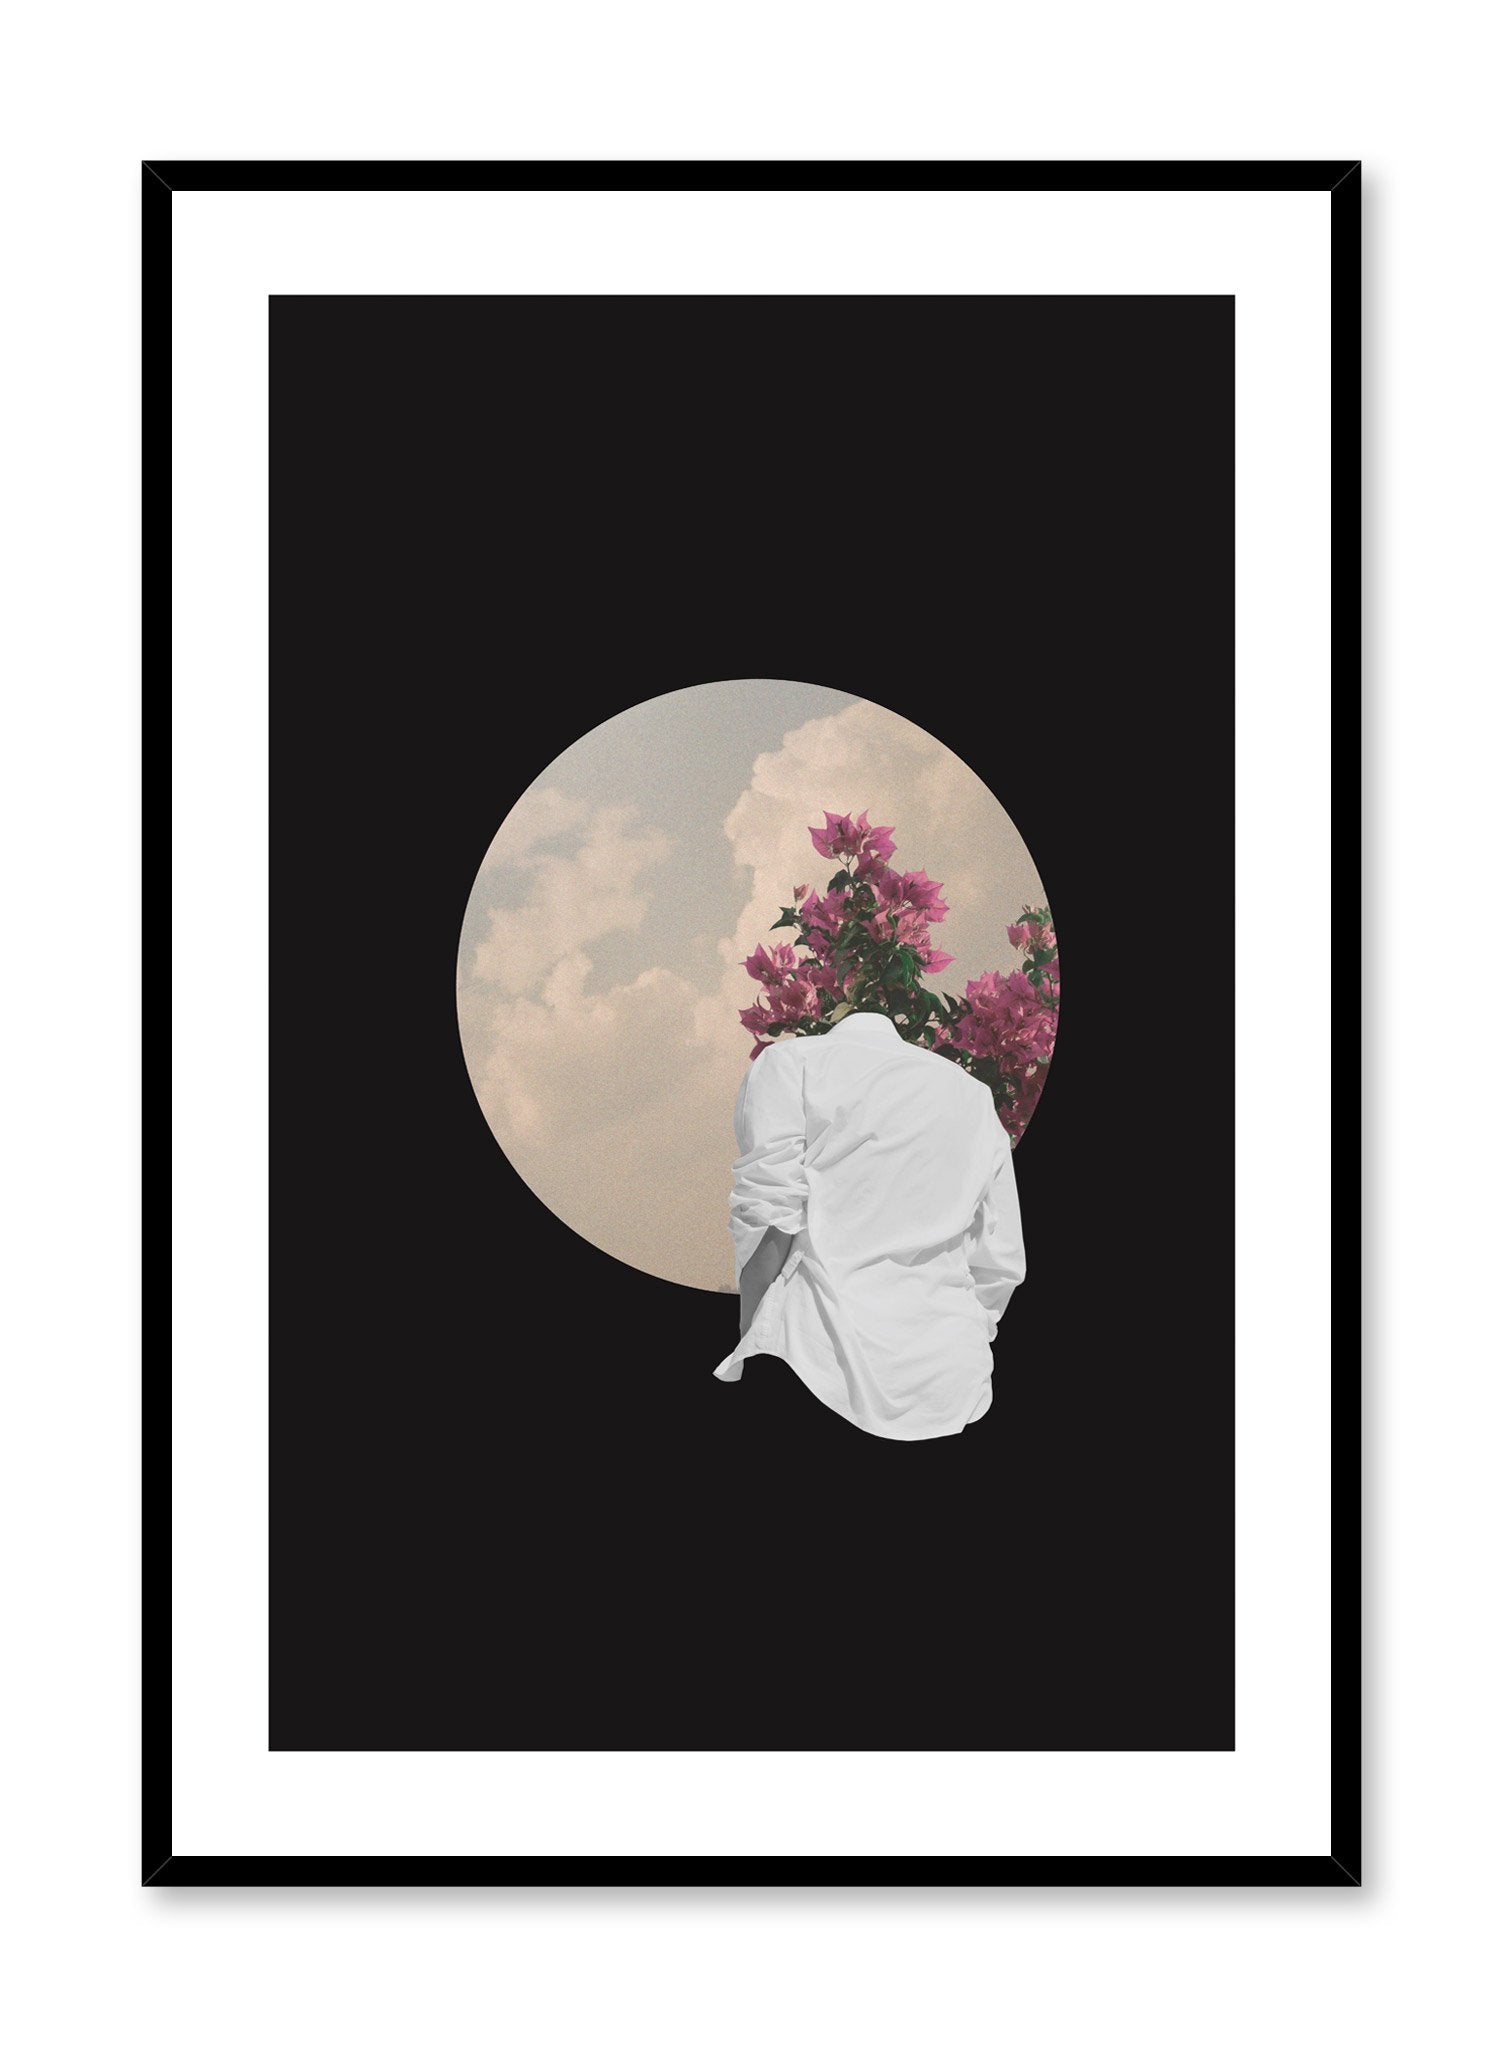 "Cloudy Reverie in Black" is a minimalist black, blue, white and pink collage poster by Opposite Wall of a cutout floral silhouette looking at a circular cloudy sky cutout over a black background.